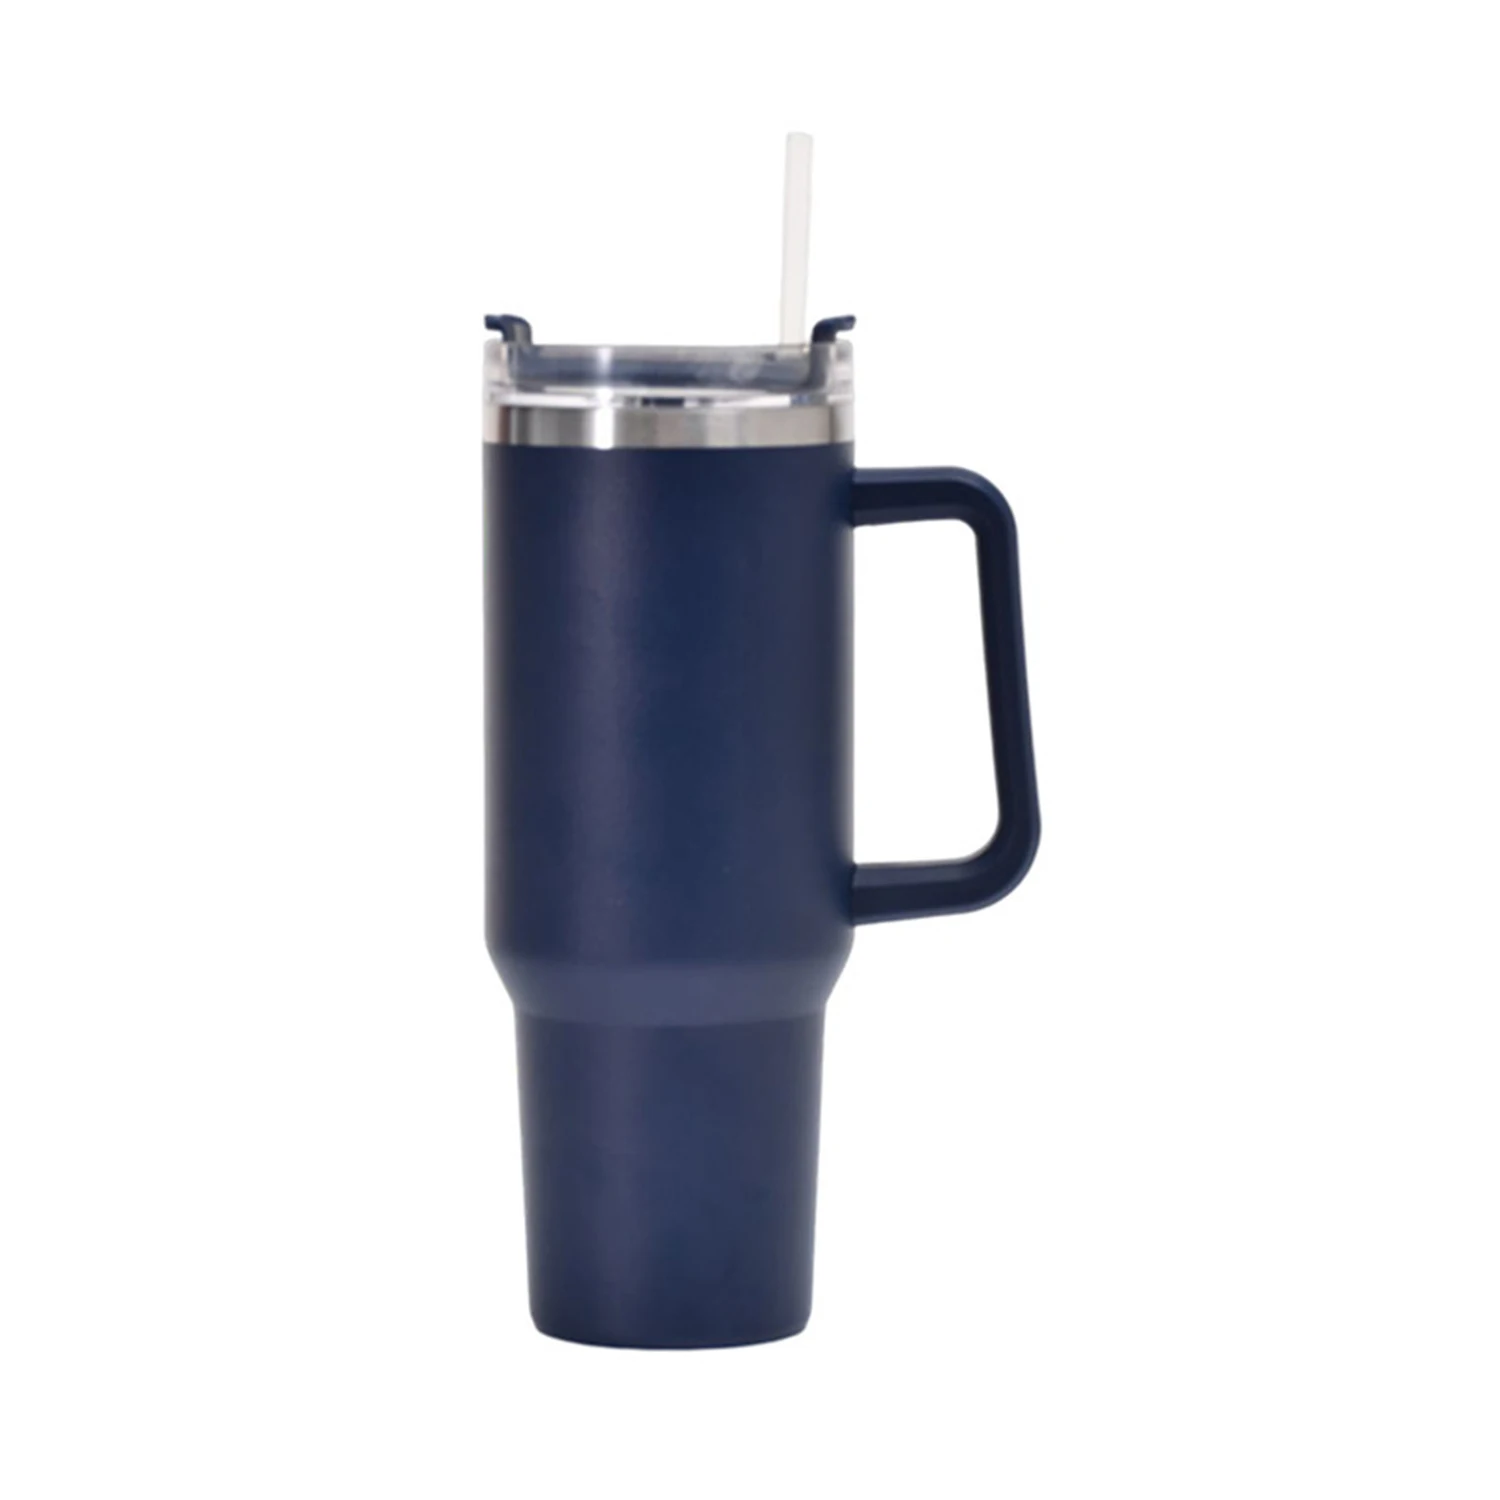 https://ae01.alicdn.com/kf/S8e350df7cfca43b486a9a6b1e58ef56bZ/40OZ-Stainless-Steel-Straw-Coffee-Insulation-Cup-With-Handle-Portable-Car-Water-Bottle-LargeCapacity-Travel-BPA.jpg